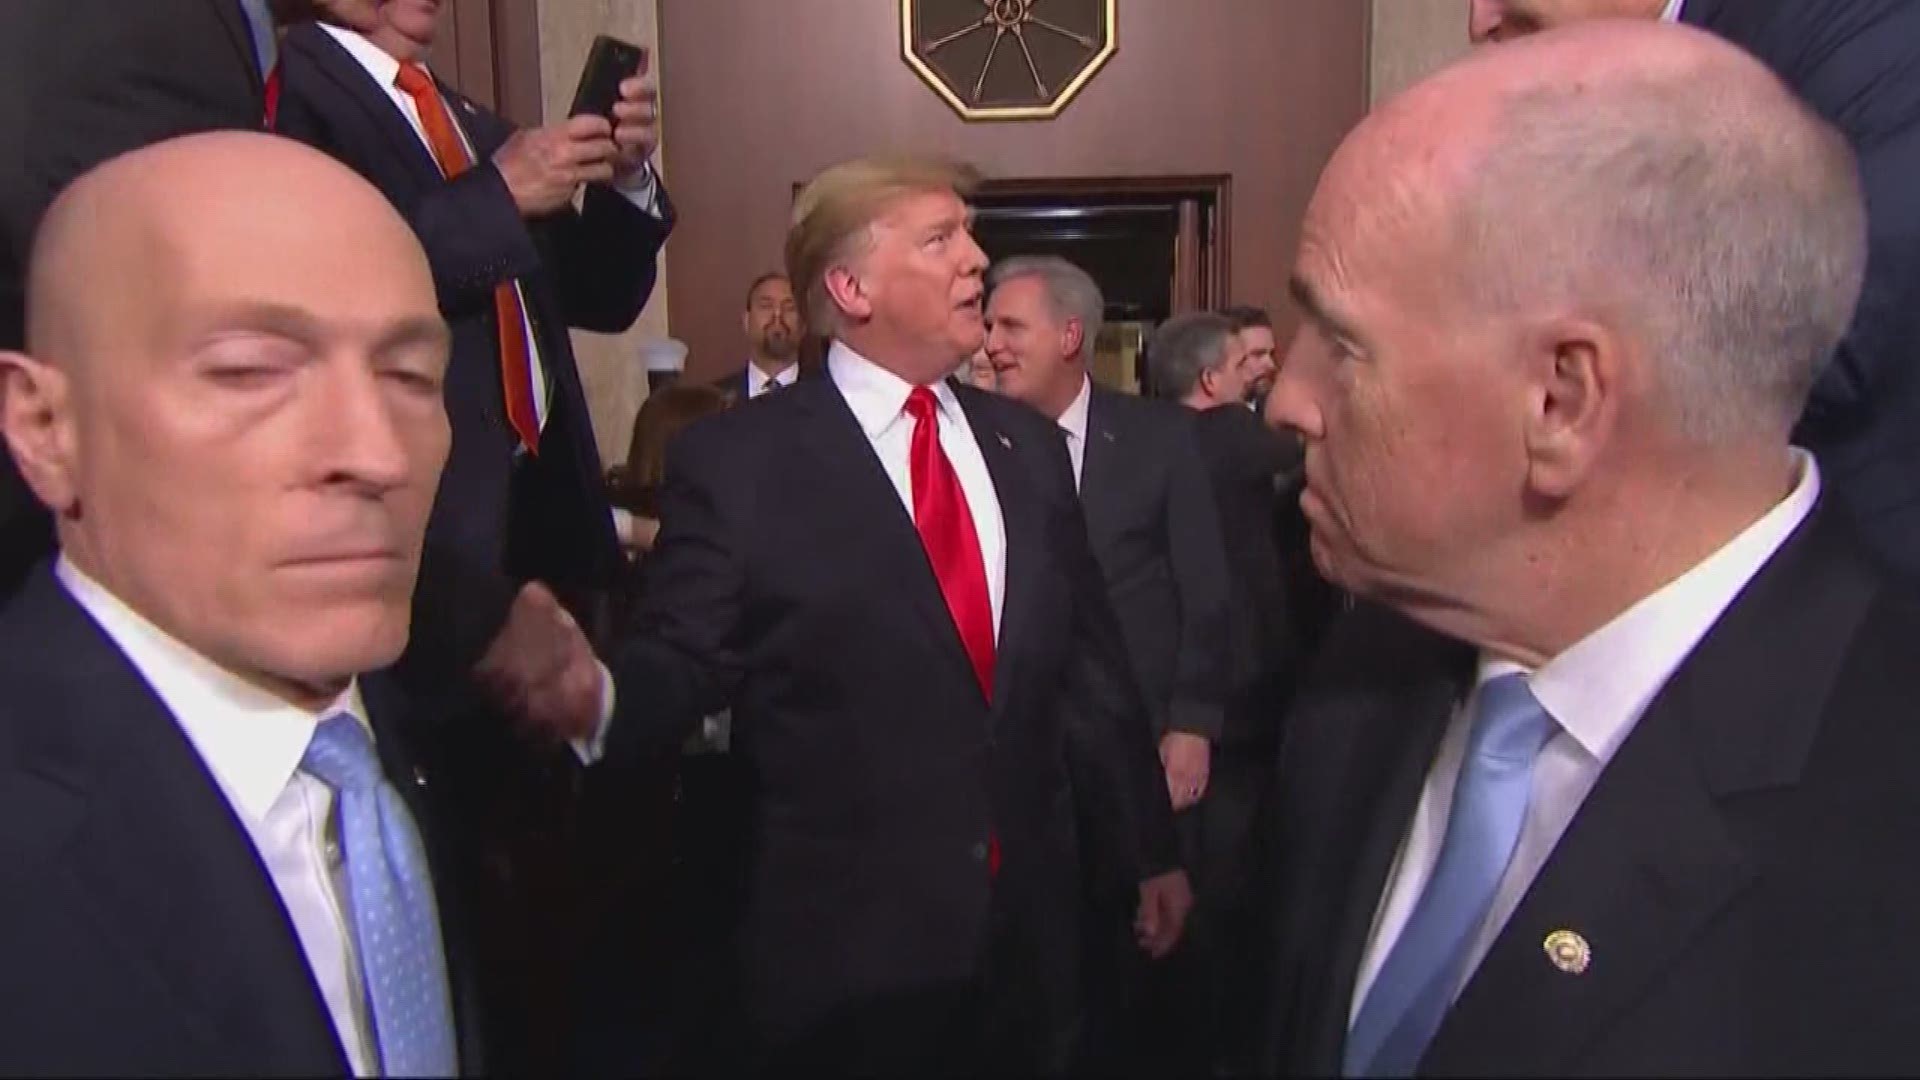 President Trump greets guests and politicians as he arrives for the 2019 State of the Union